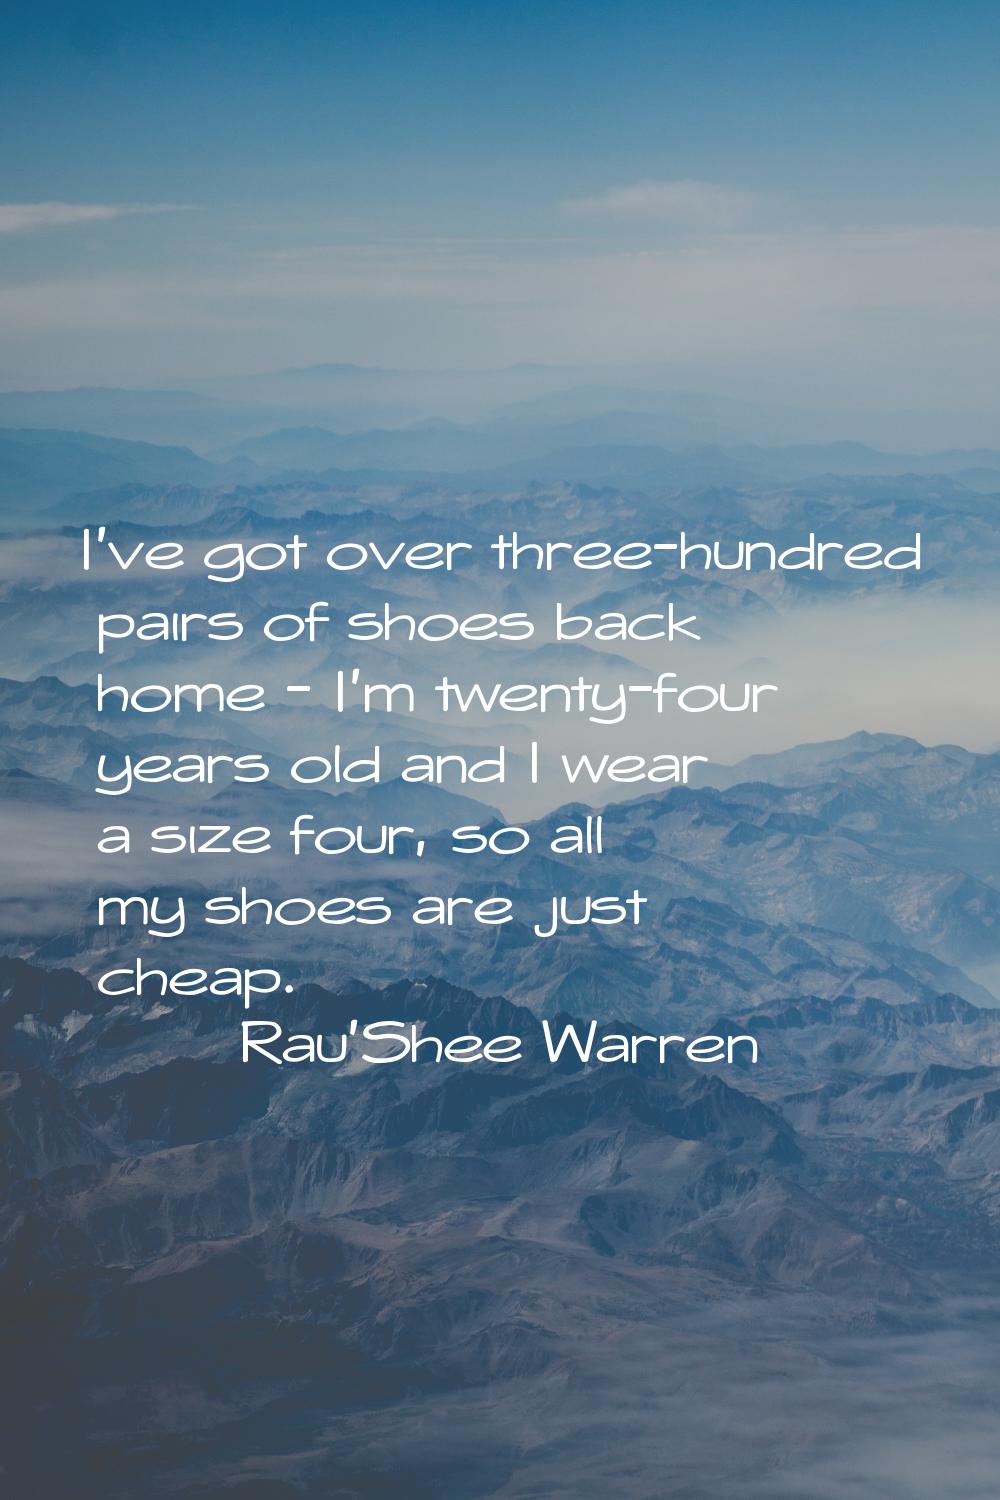 I've got over three-hundred pairs of shoes back home - I'm twenty-four years old and I wear a size 